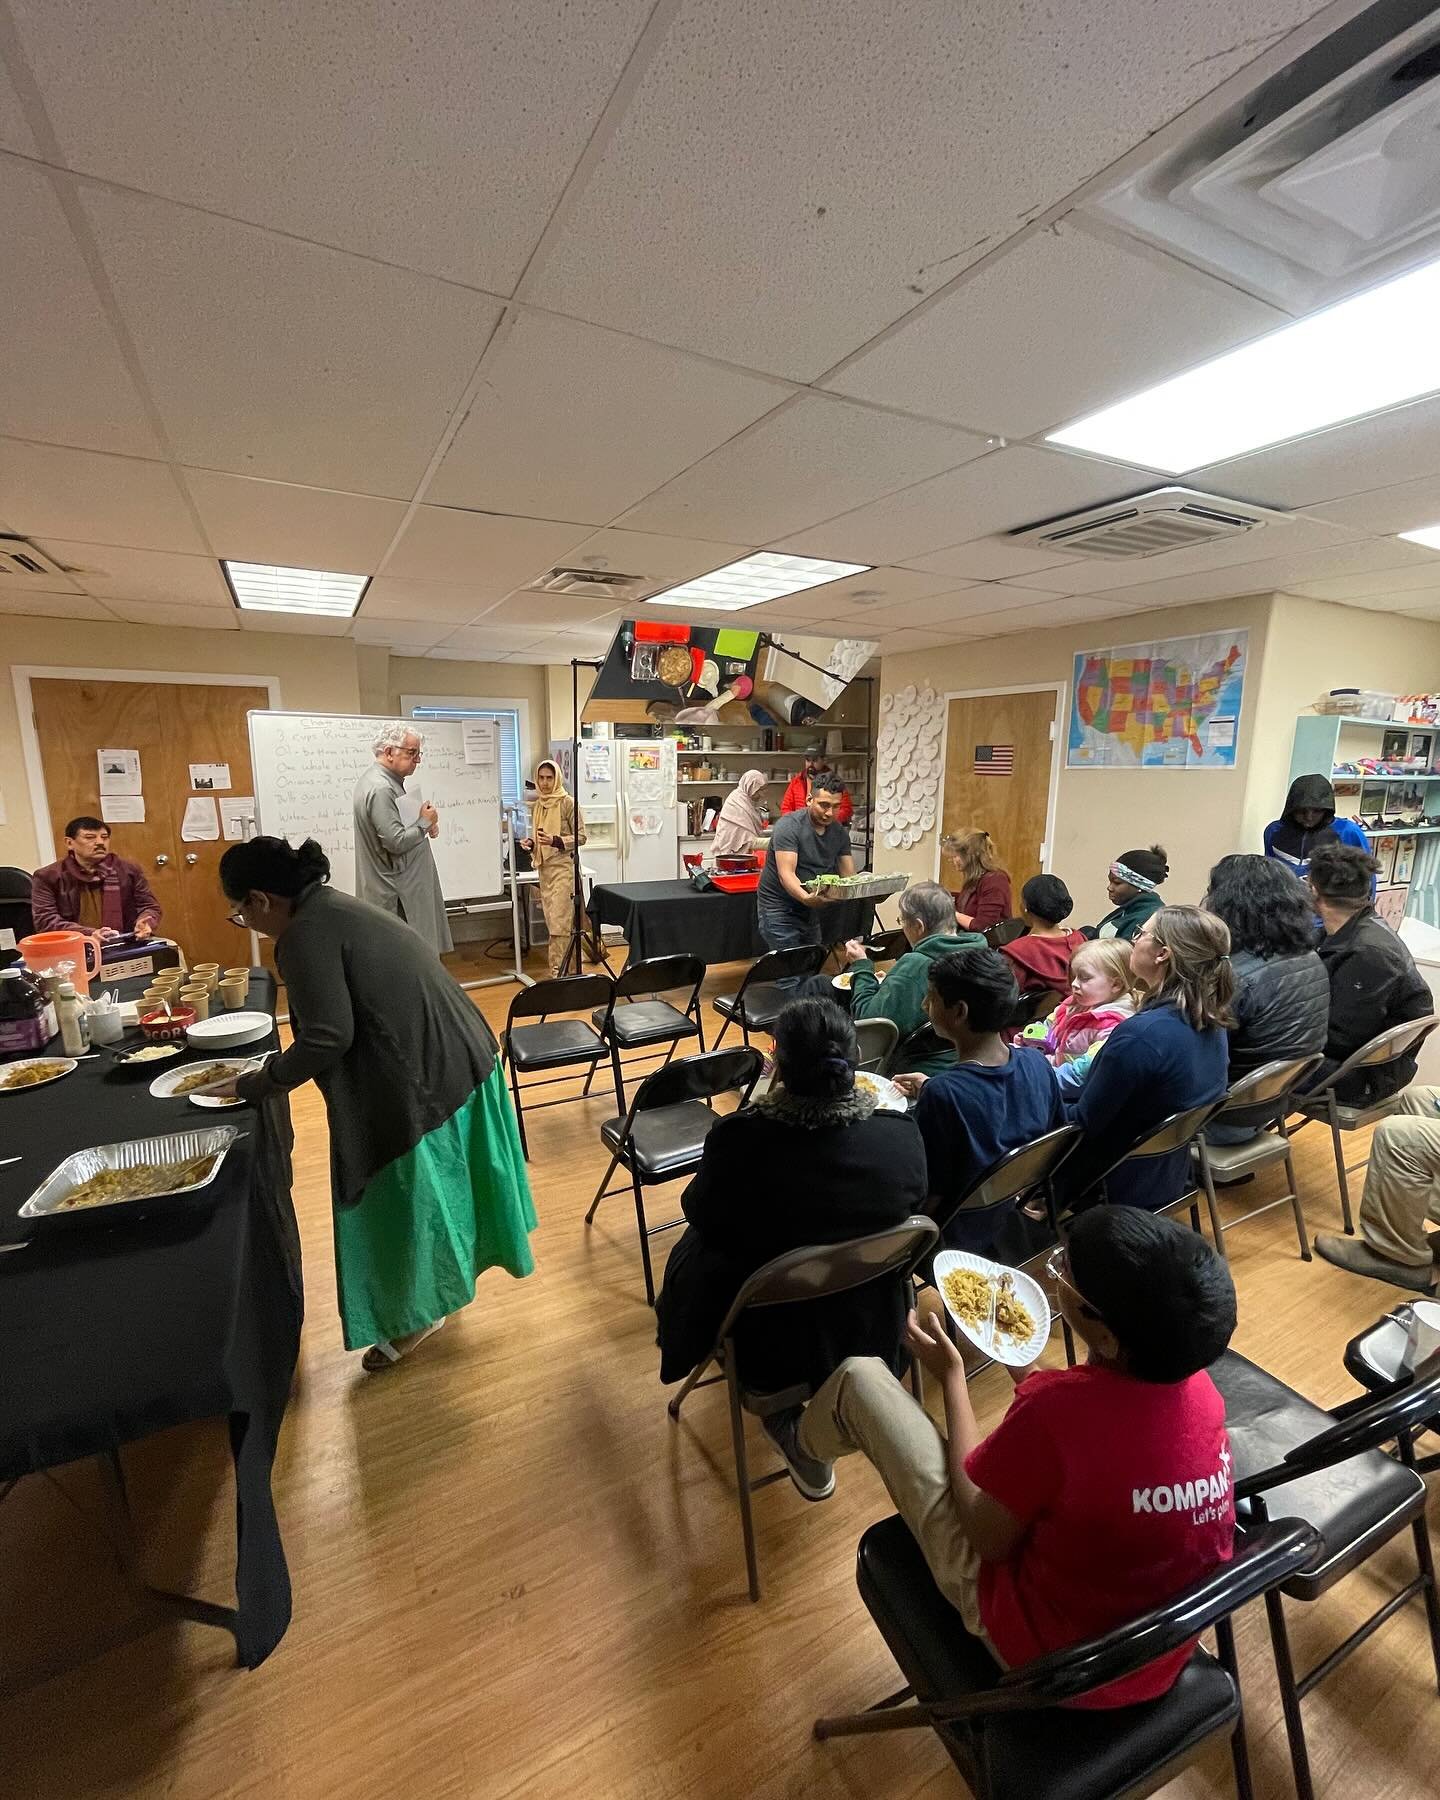 Last week we enjoyed a traditional Pakistani dish chicken pulao made by Asifa A and her mom, Nasreen! Check out their recipe in the last picture!!

Pakistani Harmonium player and singer Daniel W accompanied the cooking demonstration with his music 🎶